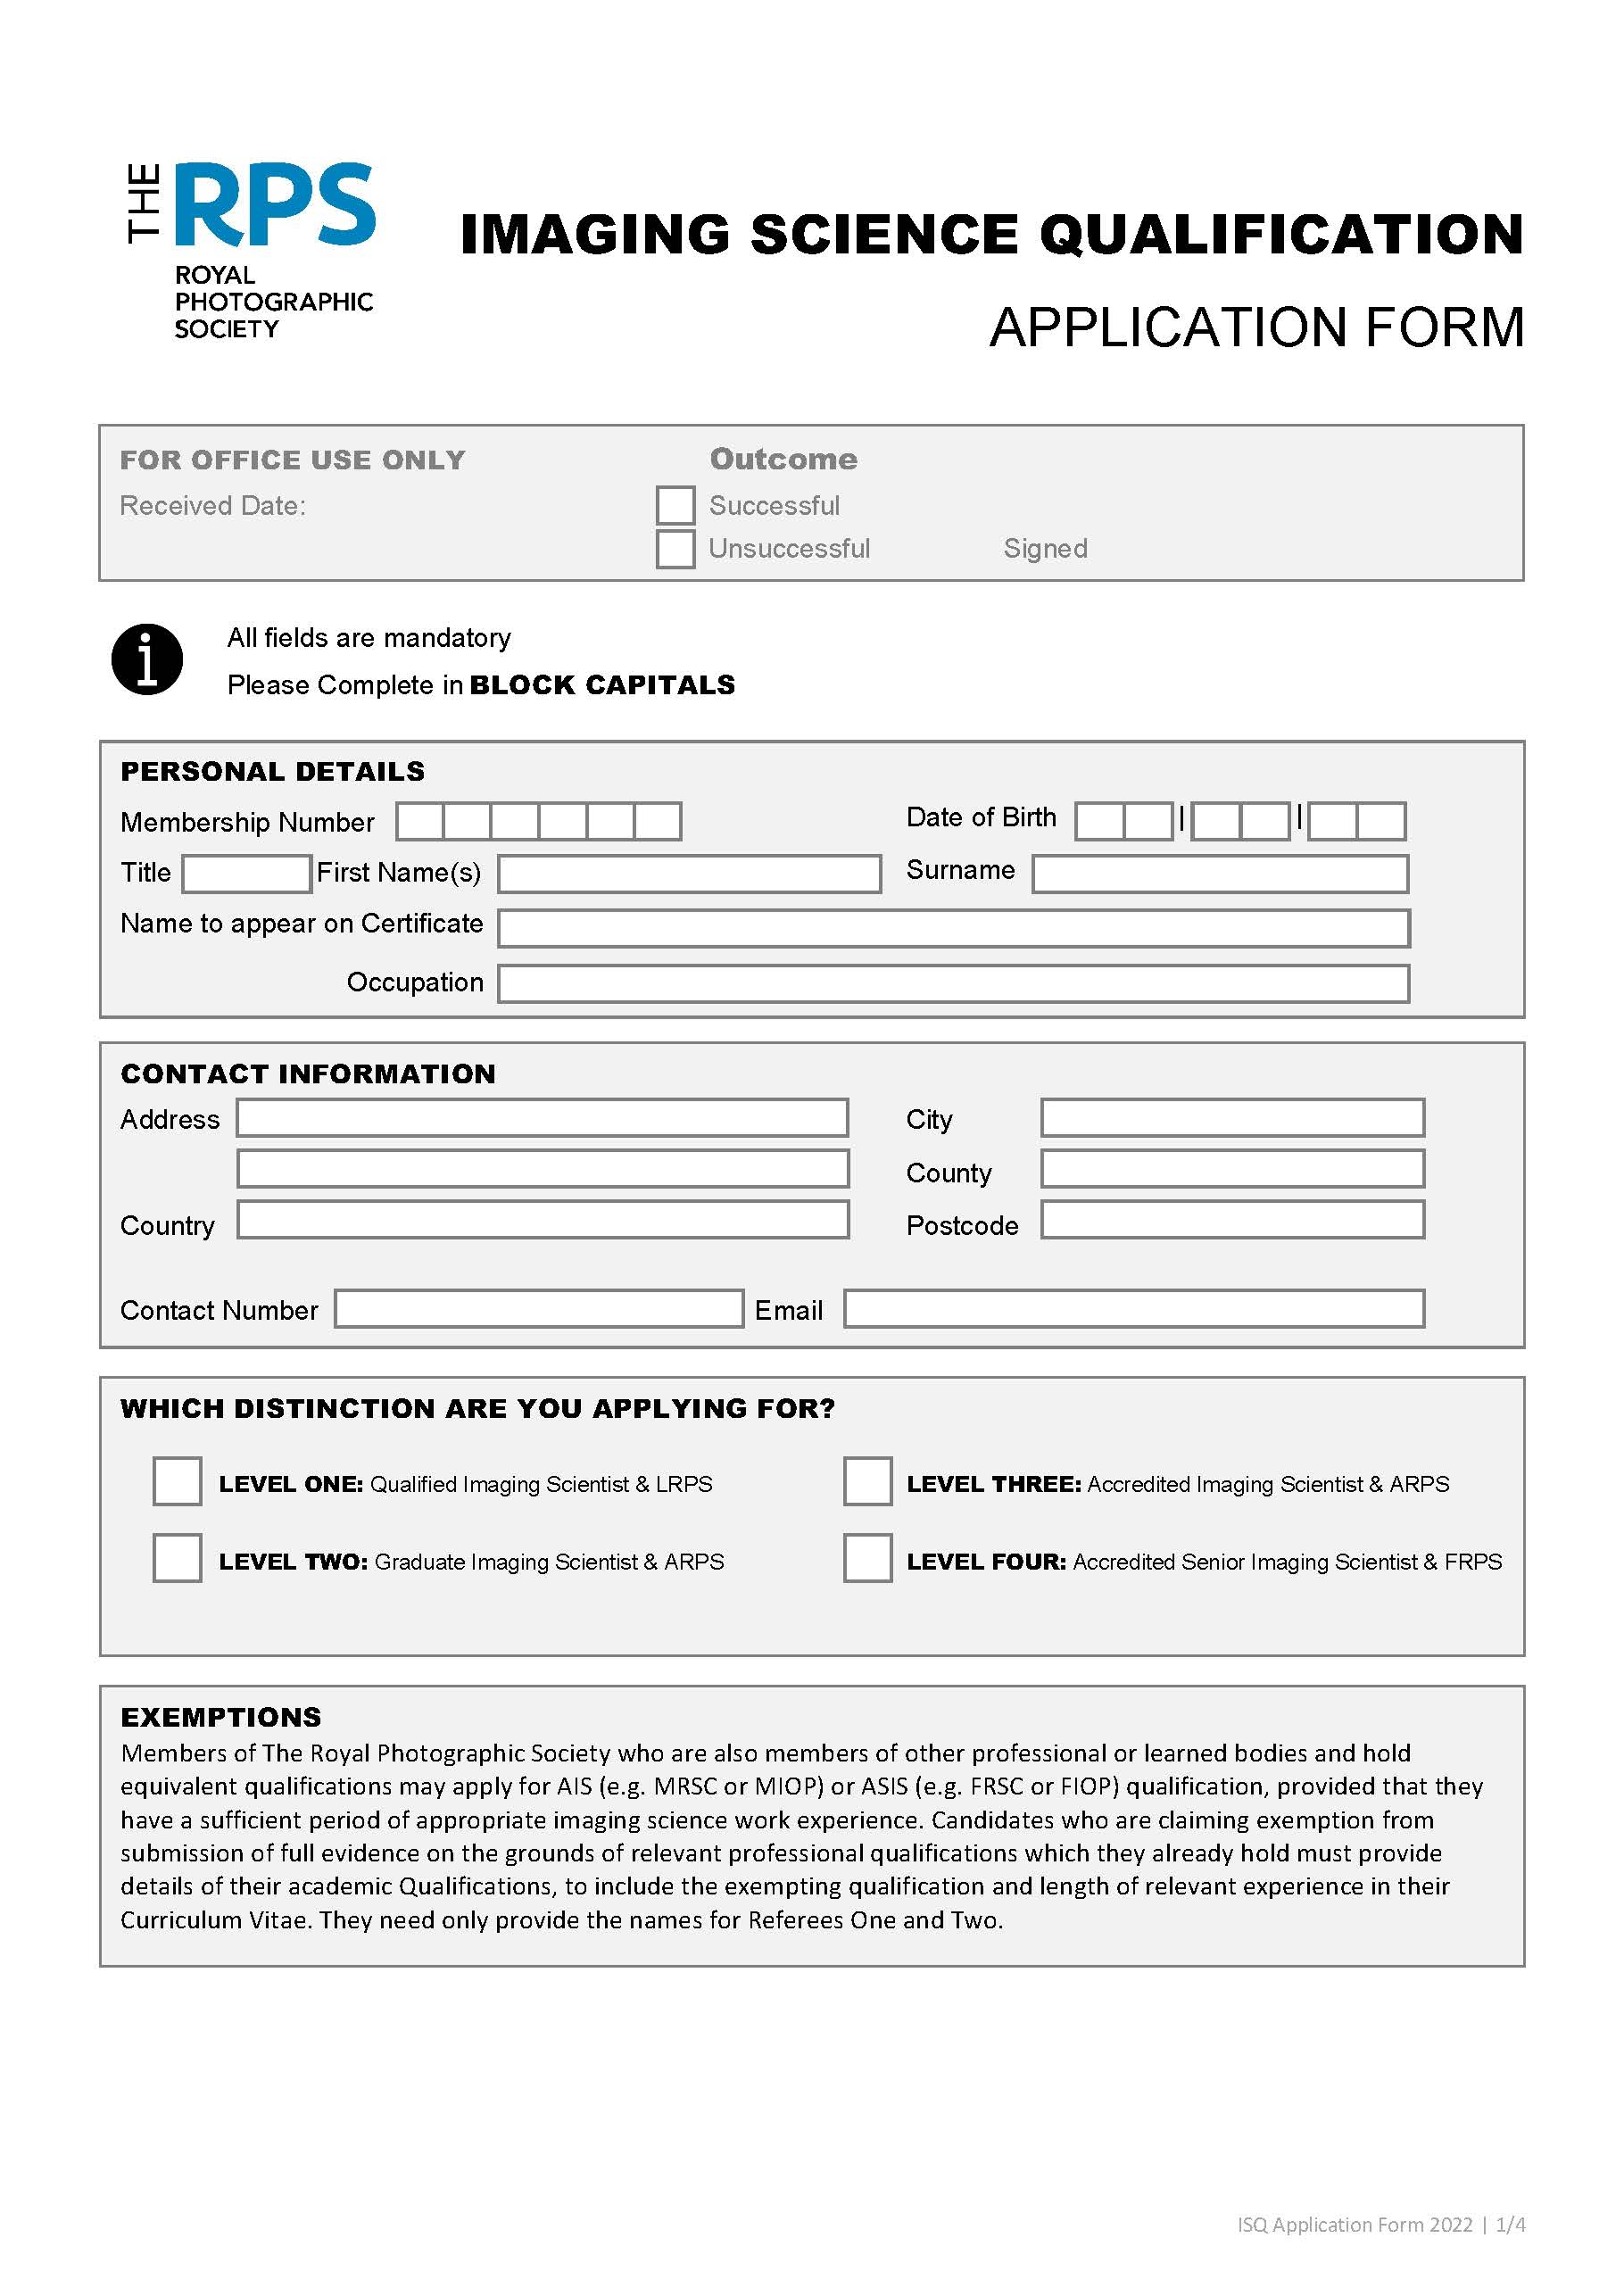 ISQ Application Form Cover